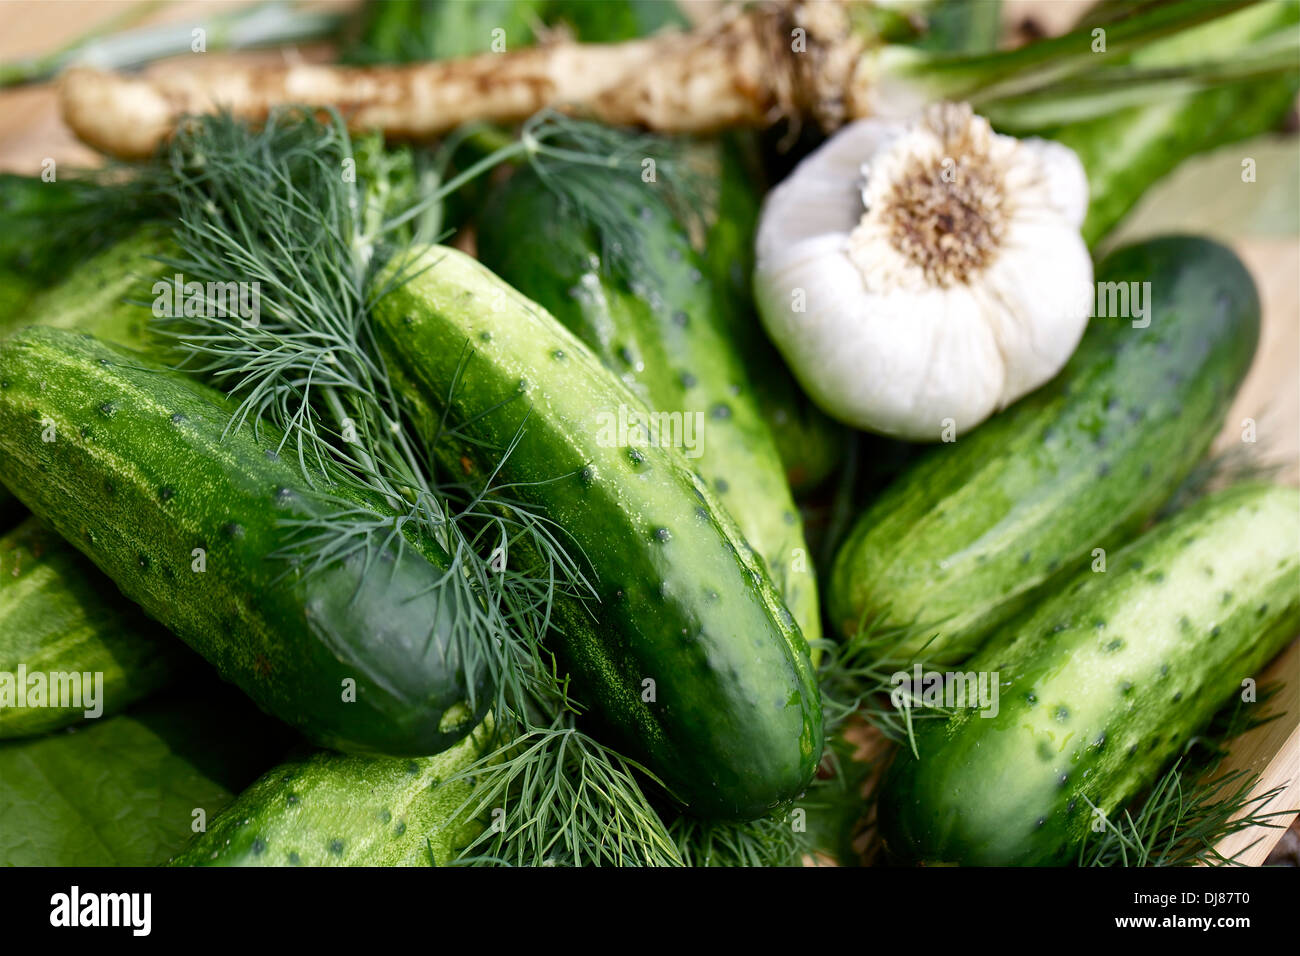 Fresh cucumbers and ingredients,homemade preserves Stock Photo